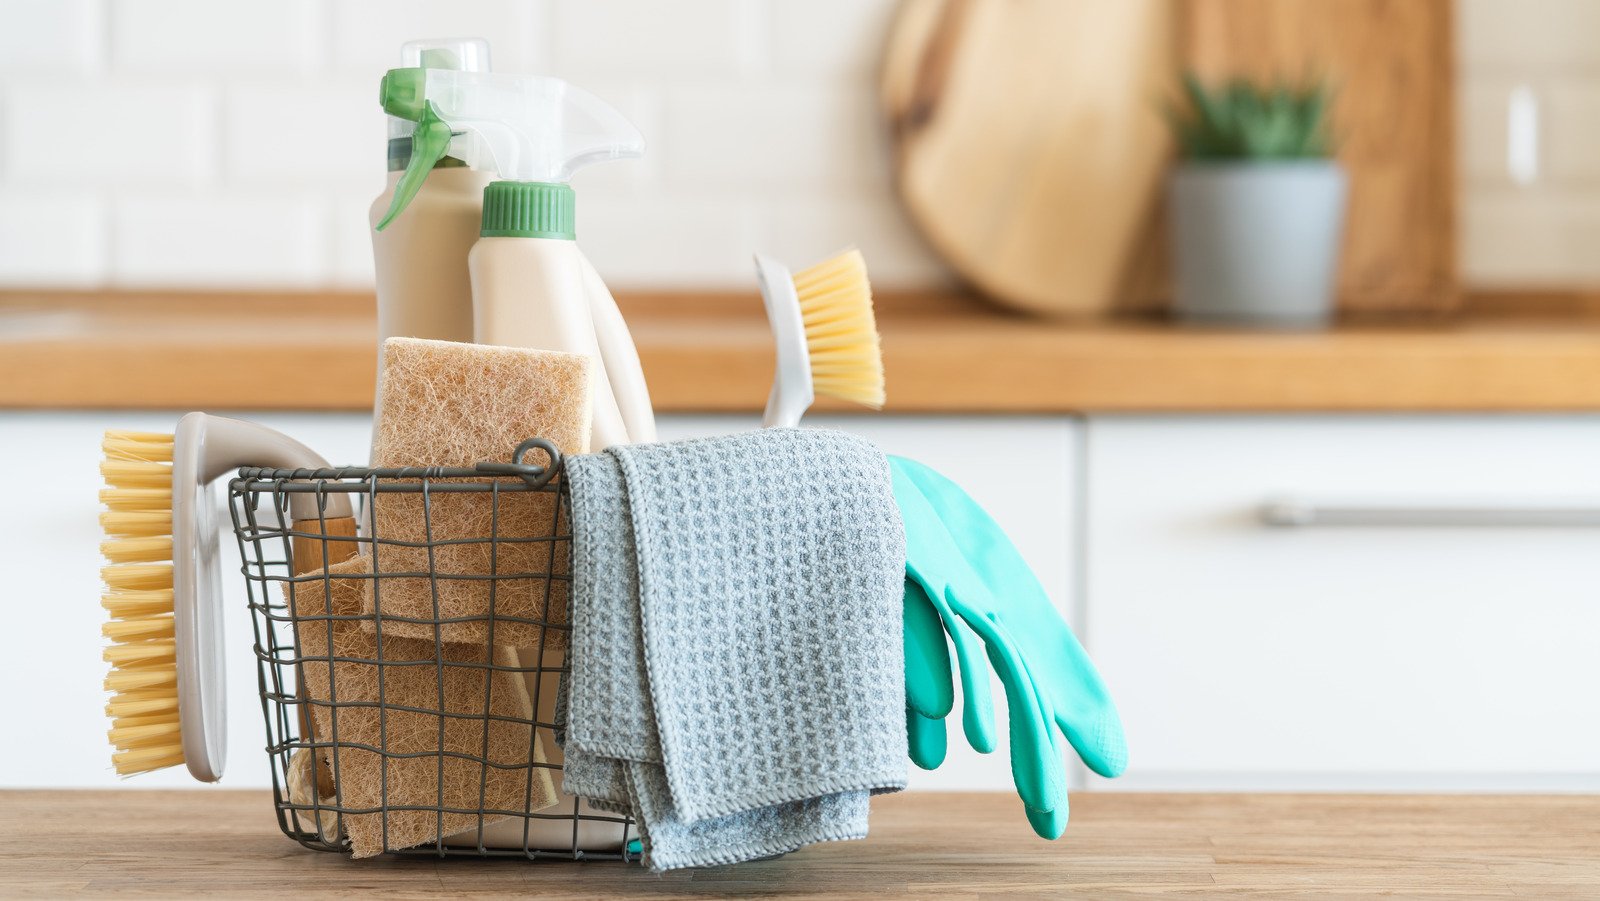 Mistakes Everyone Makes When Cleaning With Bleach